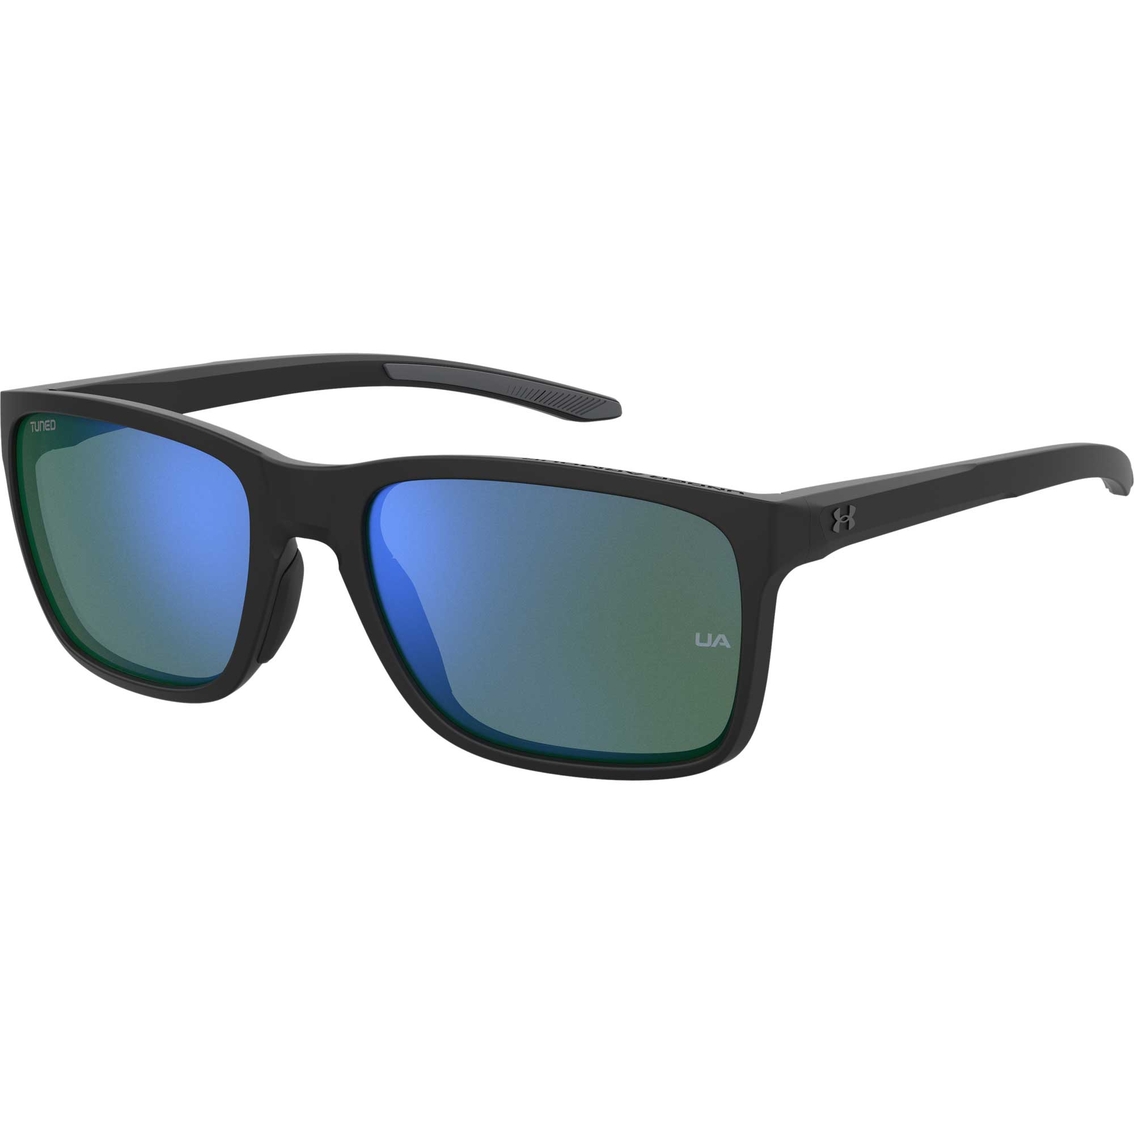 Under Armour Sunglasses 0005S - Image 1 of 3